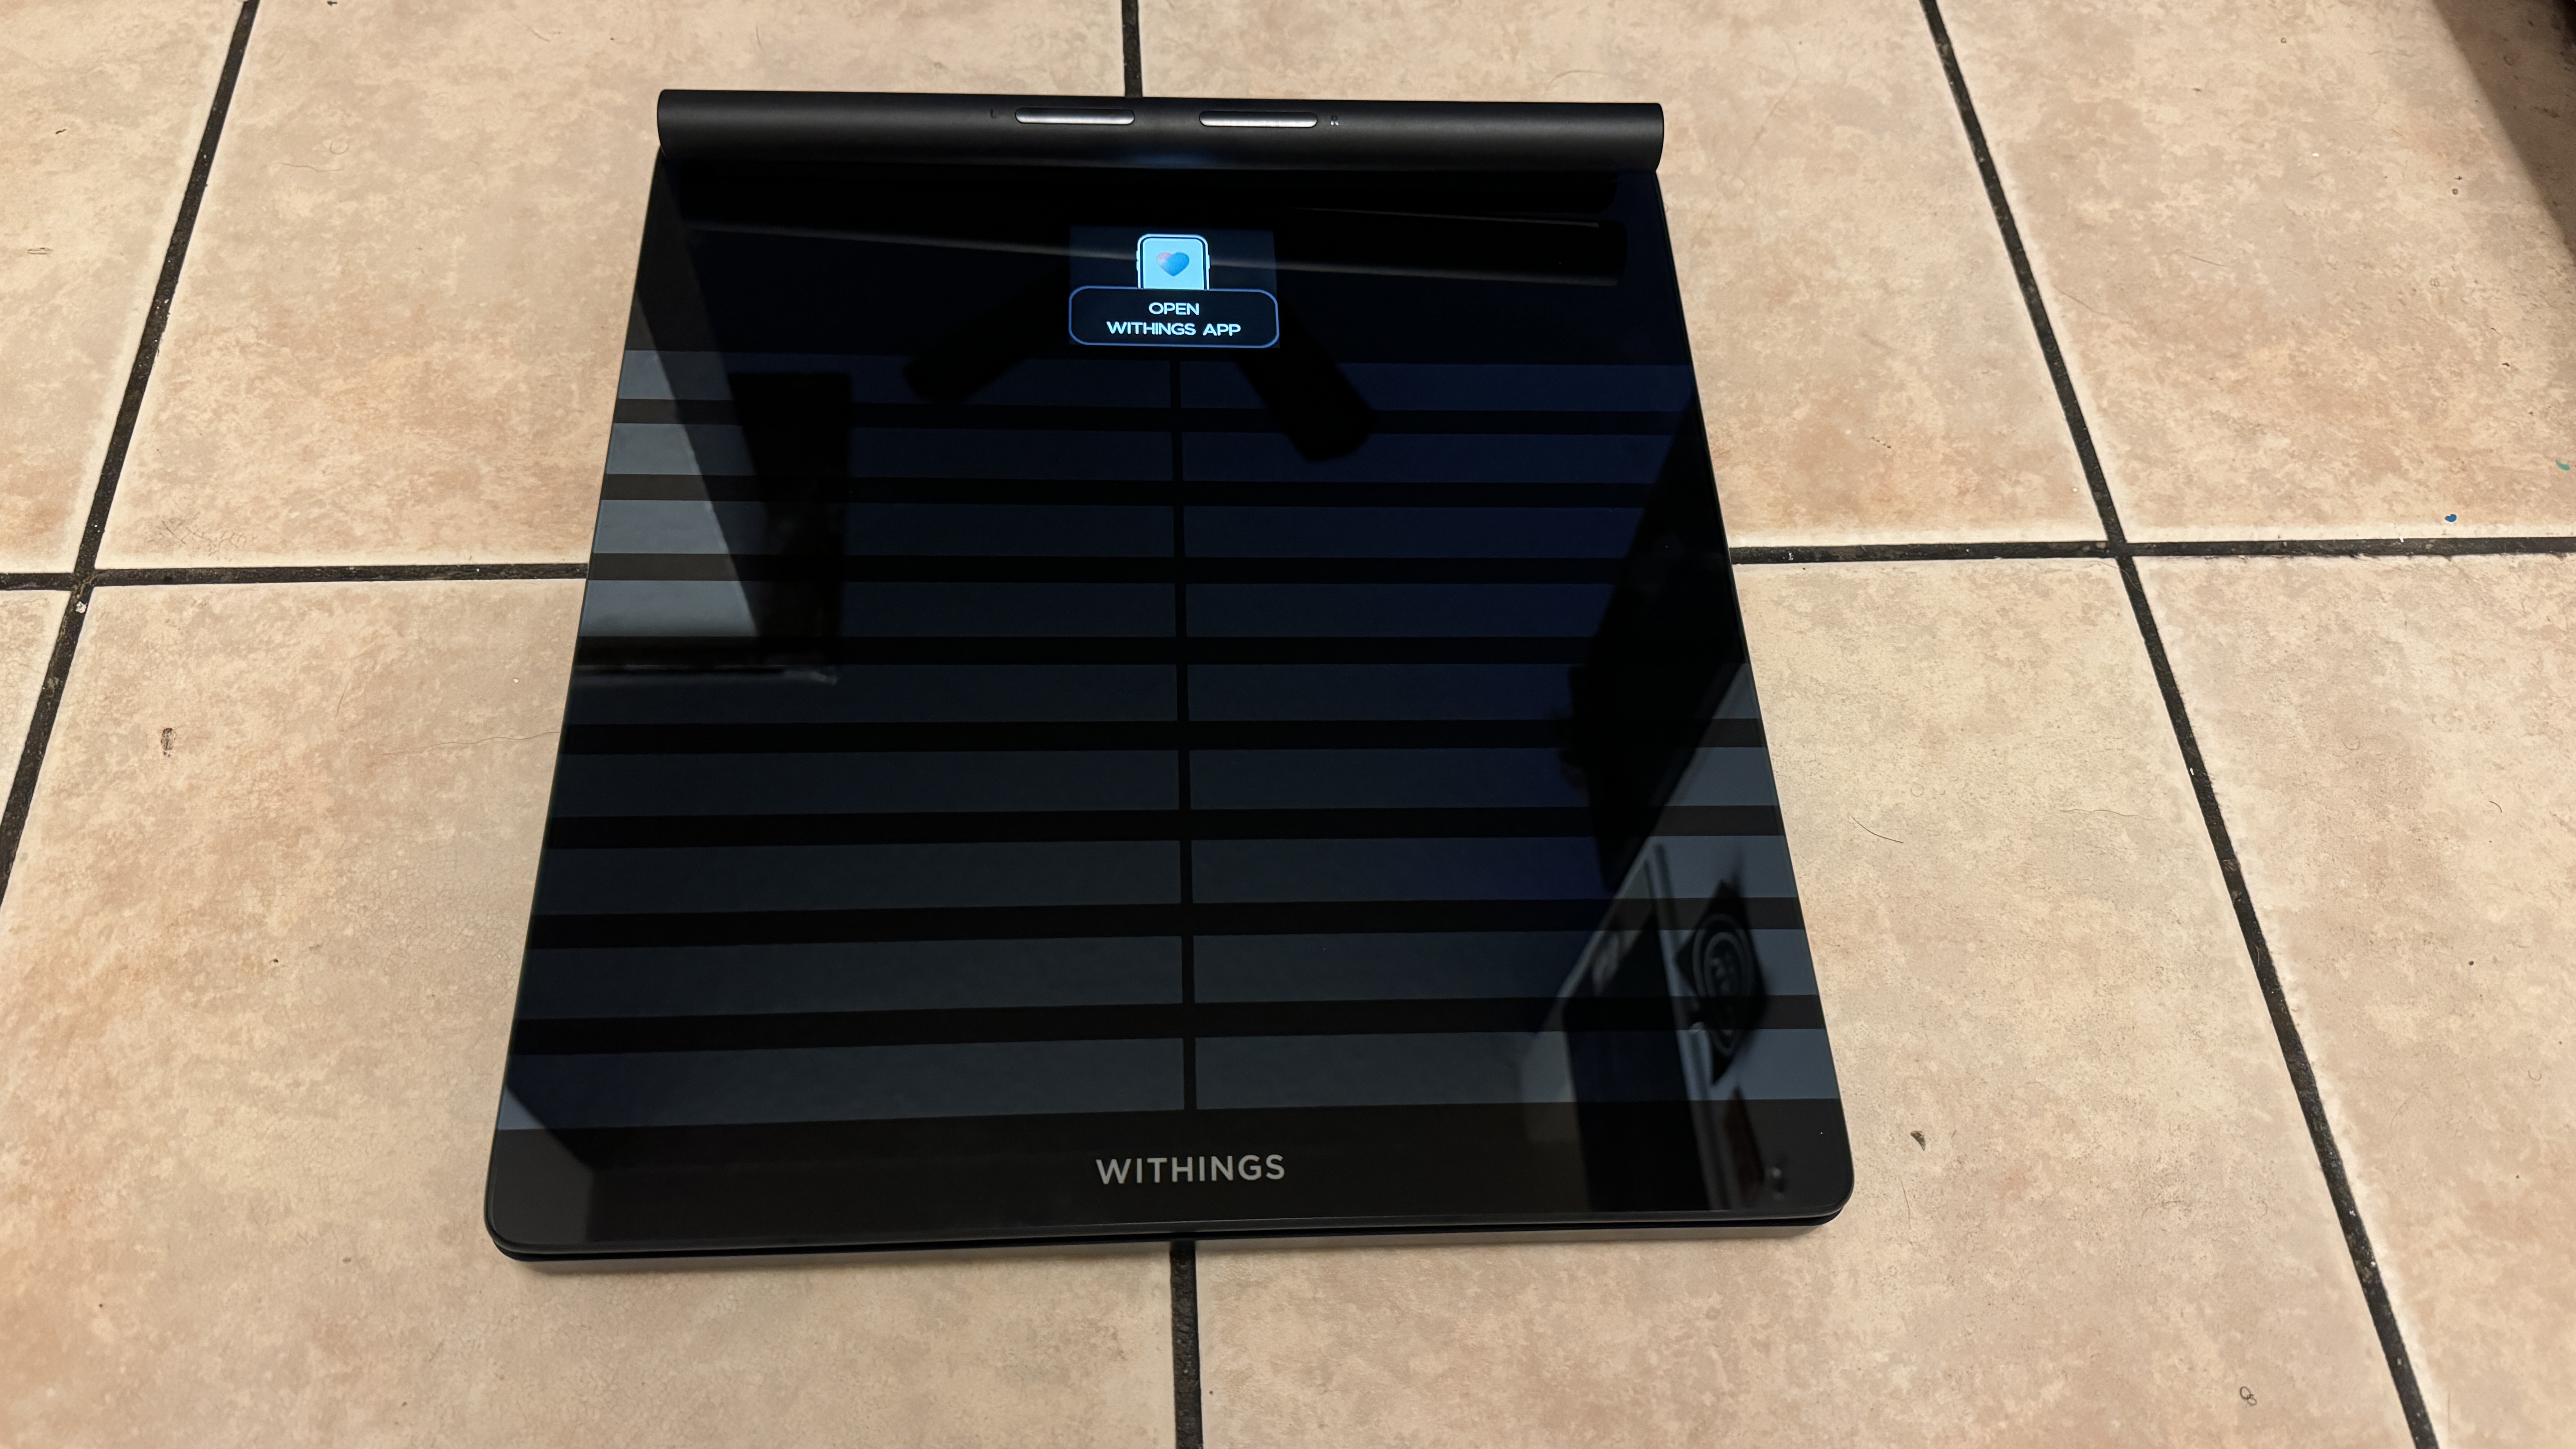 Withings Body Scan connected health station